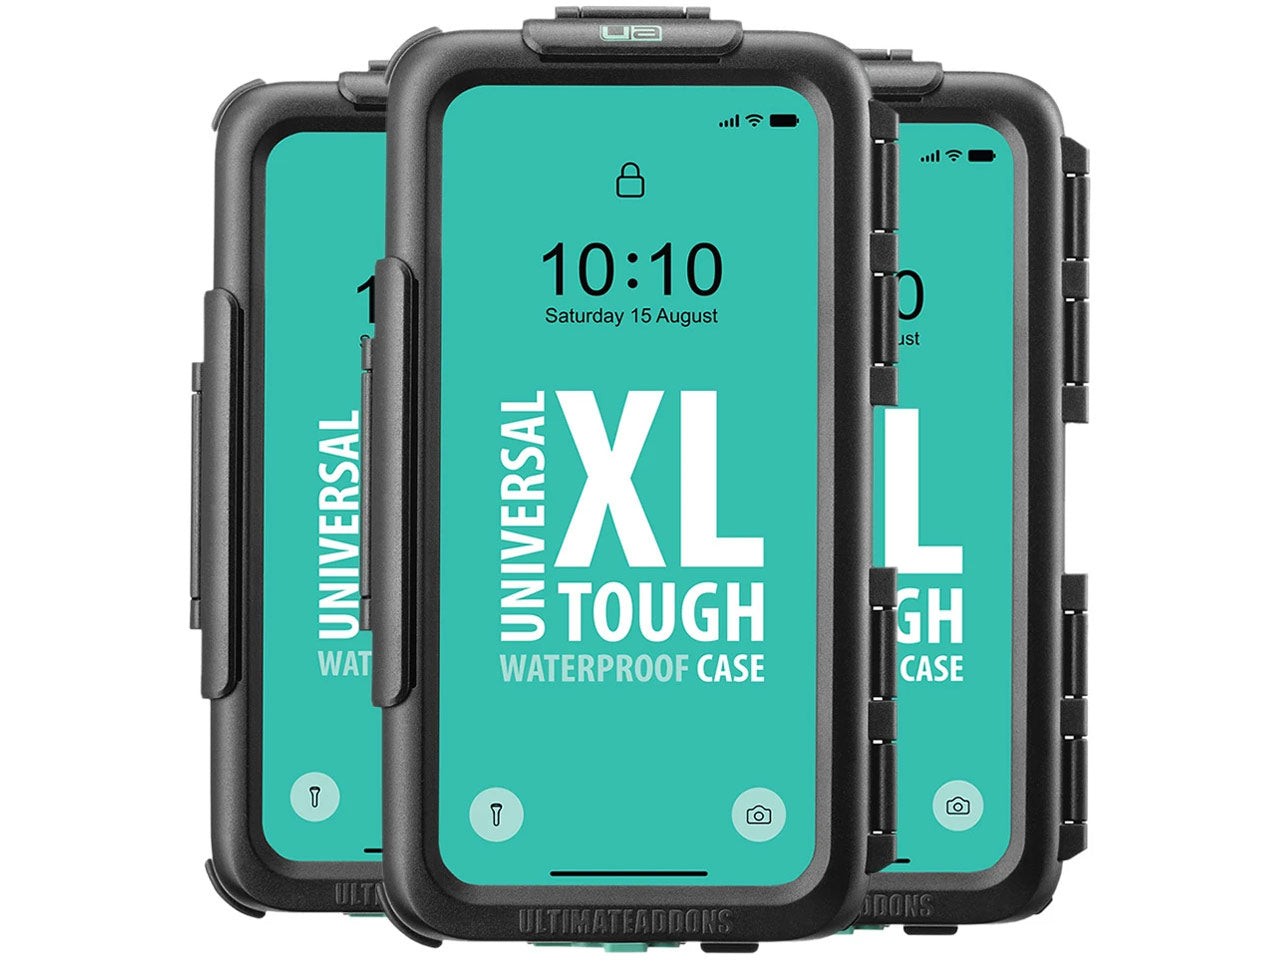 Ultimateaddons Tough Waterproof XIAOMI Phone Cases and Durable Adapters